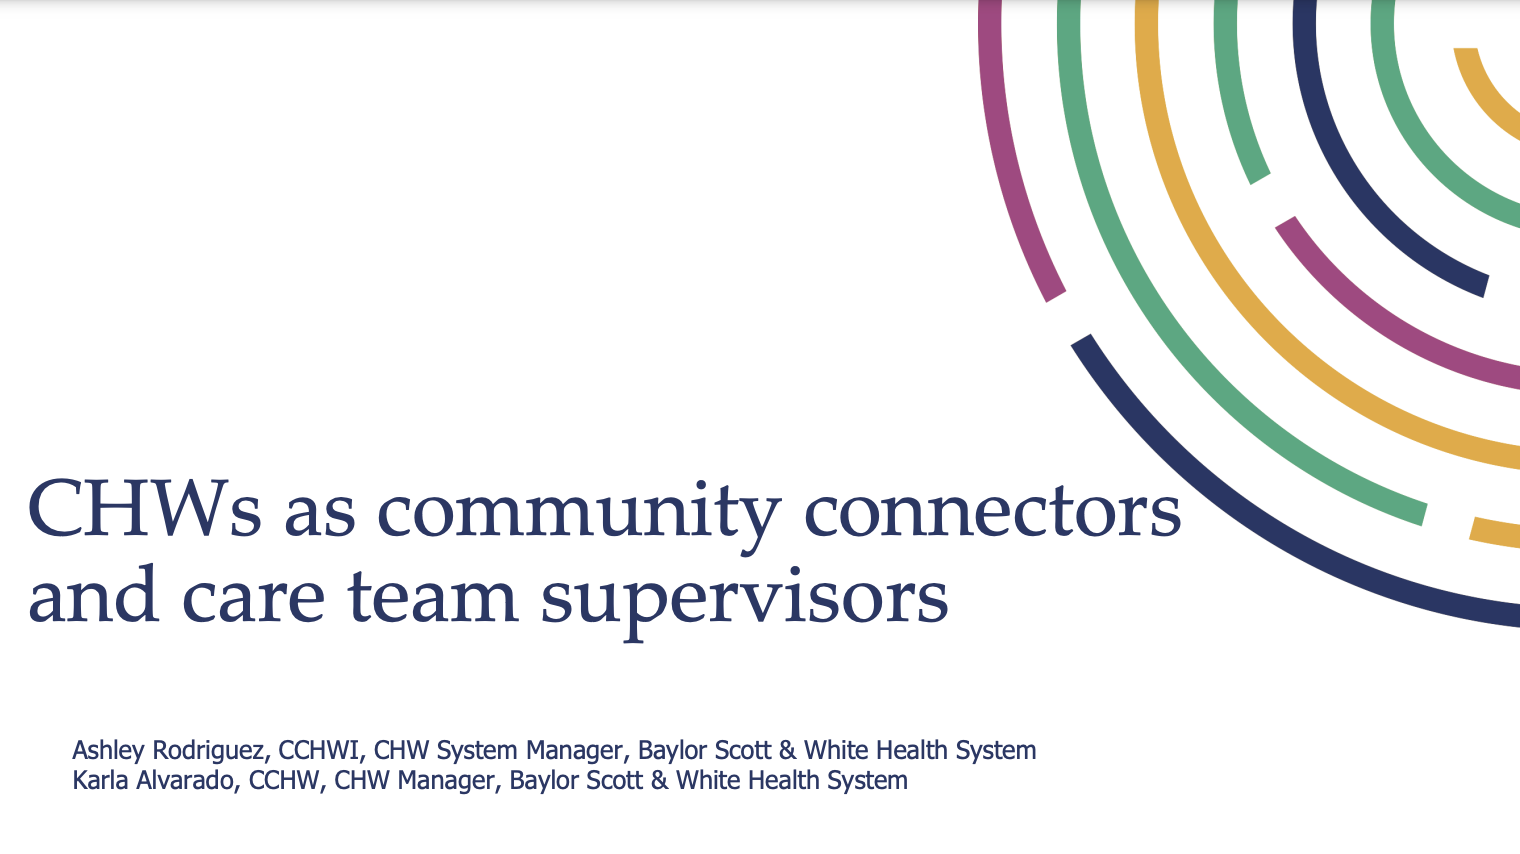 Community Health Workers As Community Connectors and Care Team Supervisors